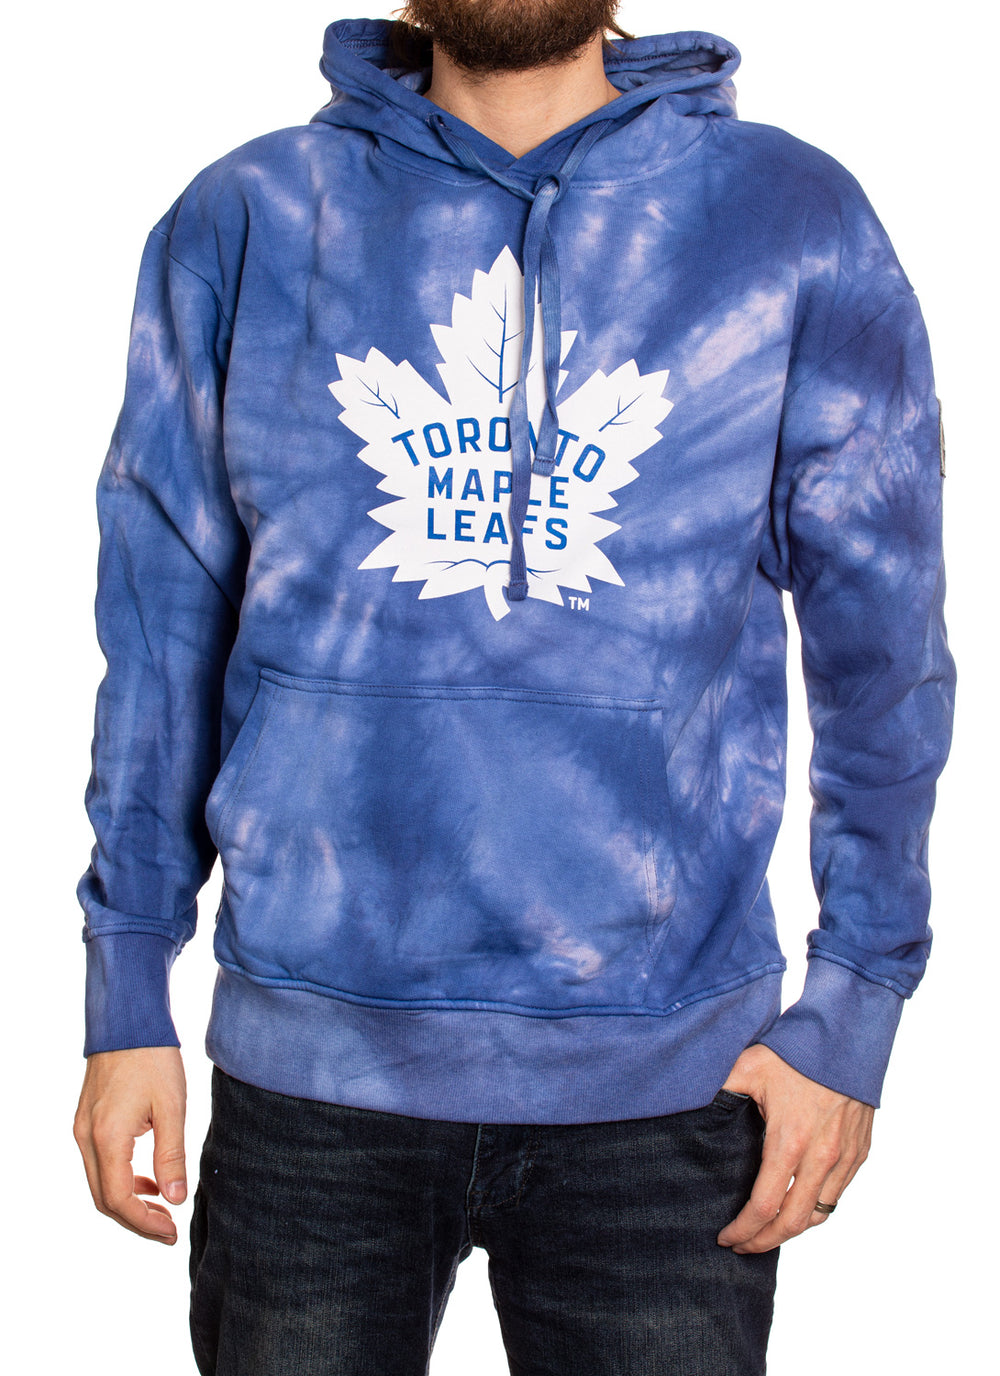 Toronto Maple Leafs Spiral Tie Dye Pullover Hoodie in Blue Front View